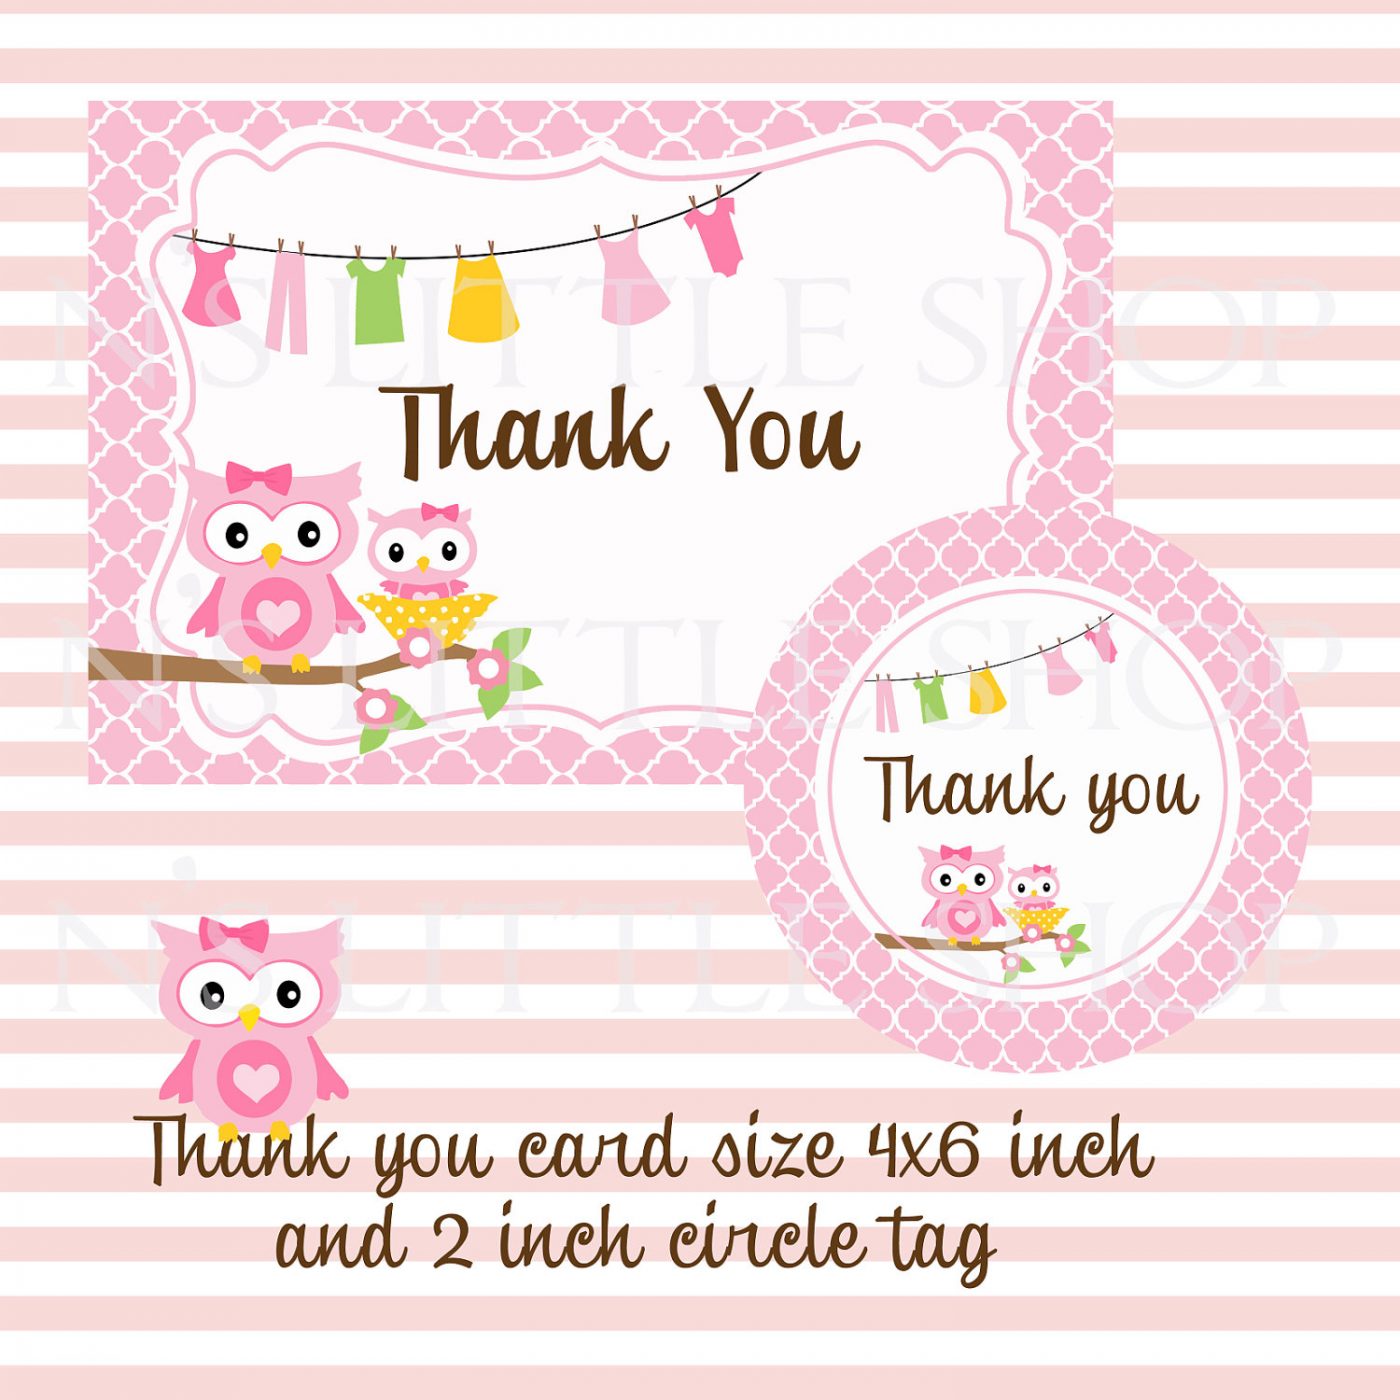 Full Size of Baby Shower:72+ Rousing Baby Shower Thank You Cards Picture Ideas Baby Shower Decorations Baby Shower Themes Baby Shower Hashtag Ideas Actividades Baby Shower Baby Shower De